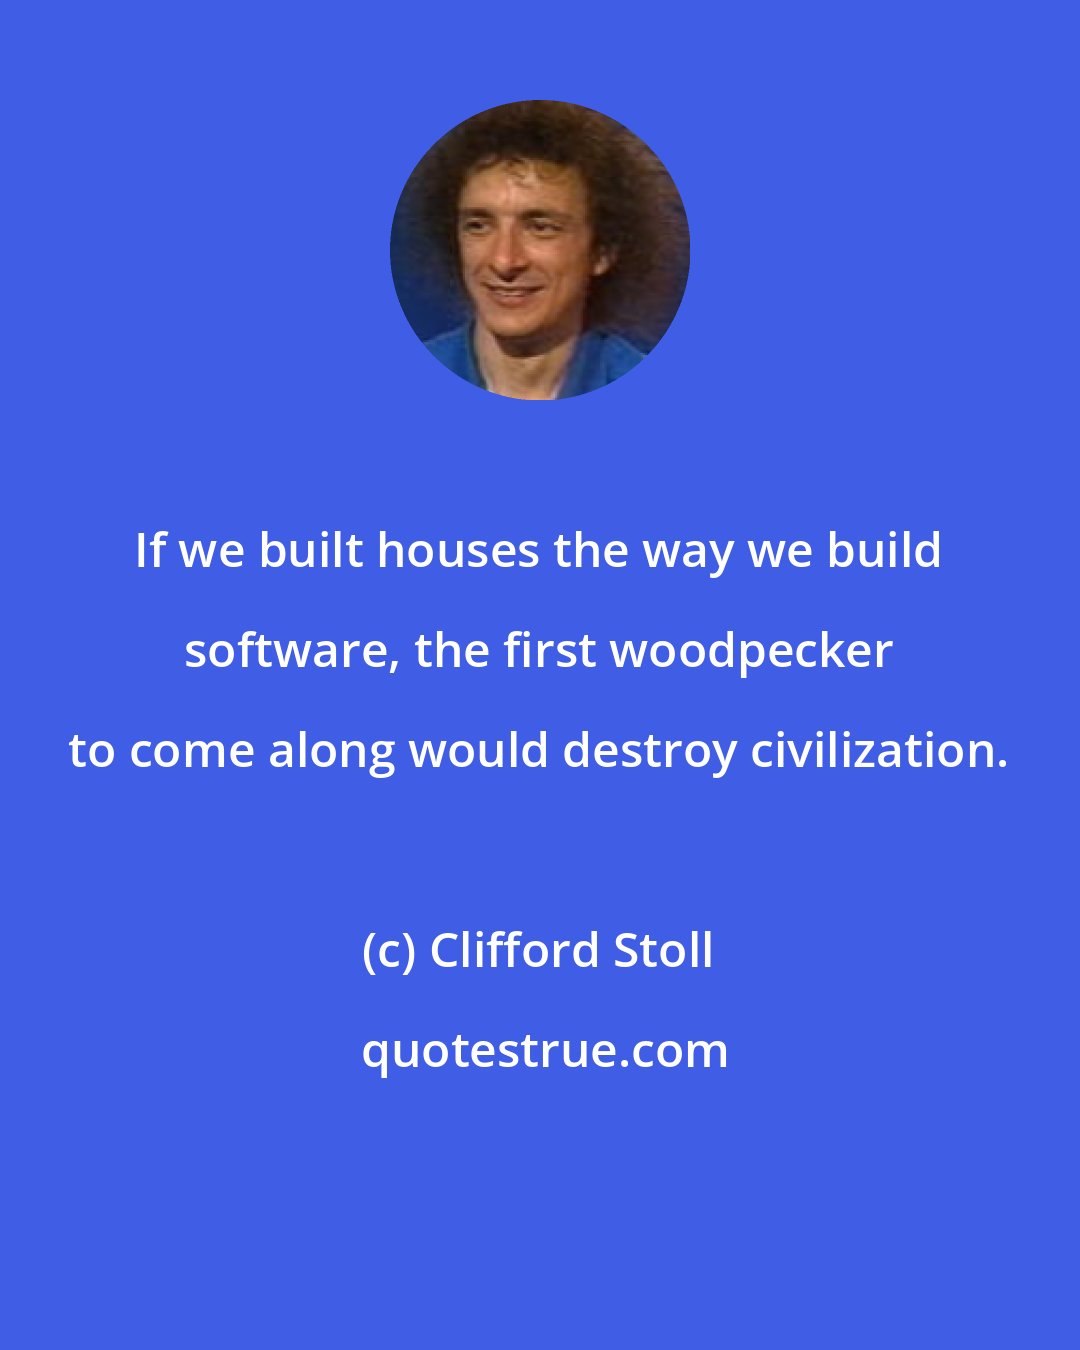 Clifford Stoll: If we built houses the way we build software, the first woodpecker to come along would destroy civilization.